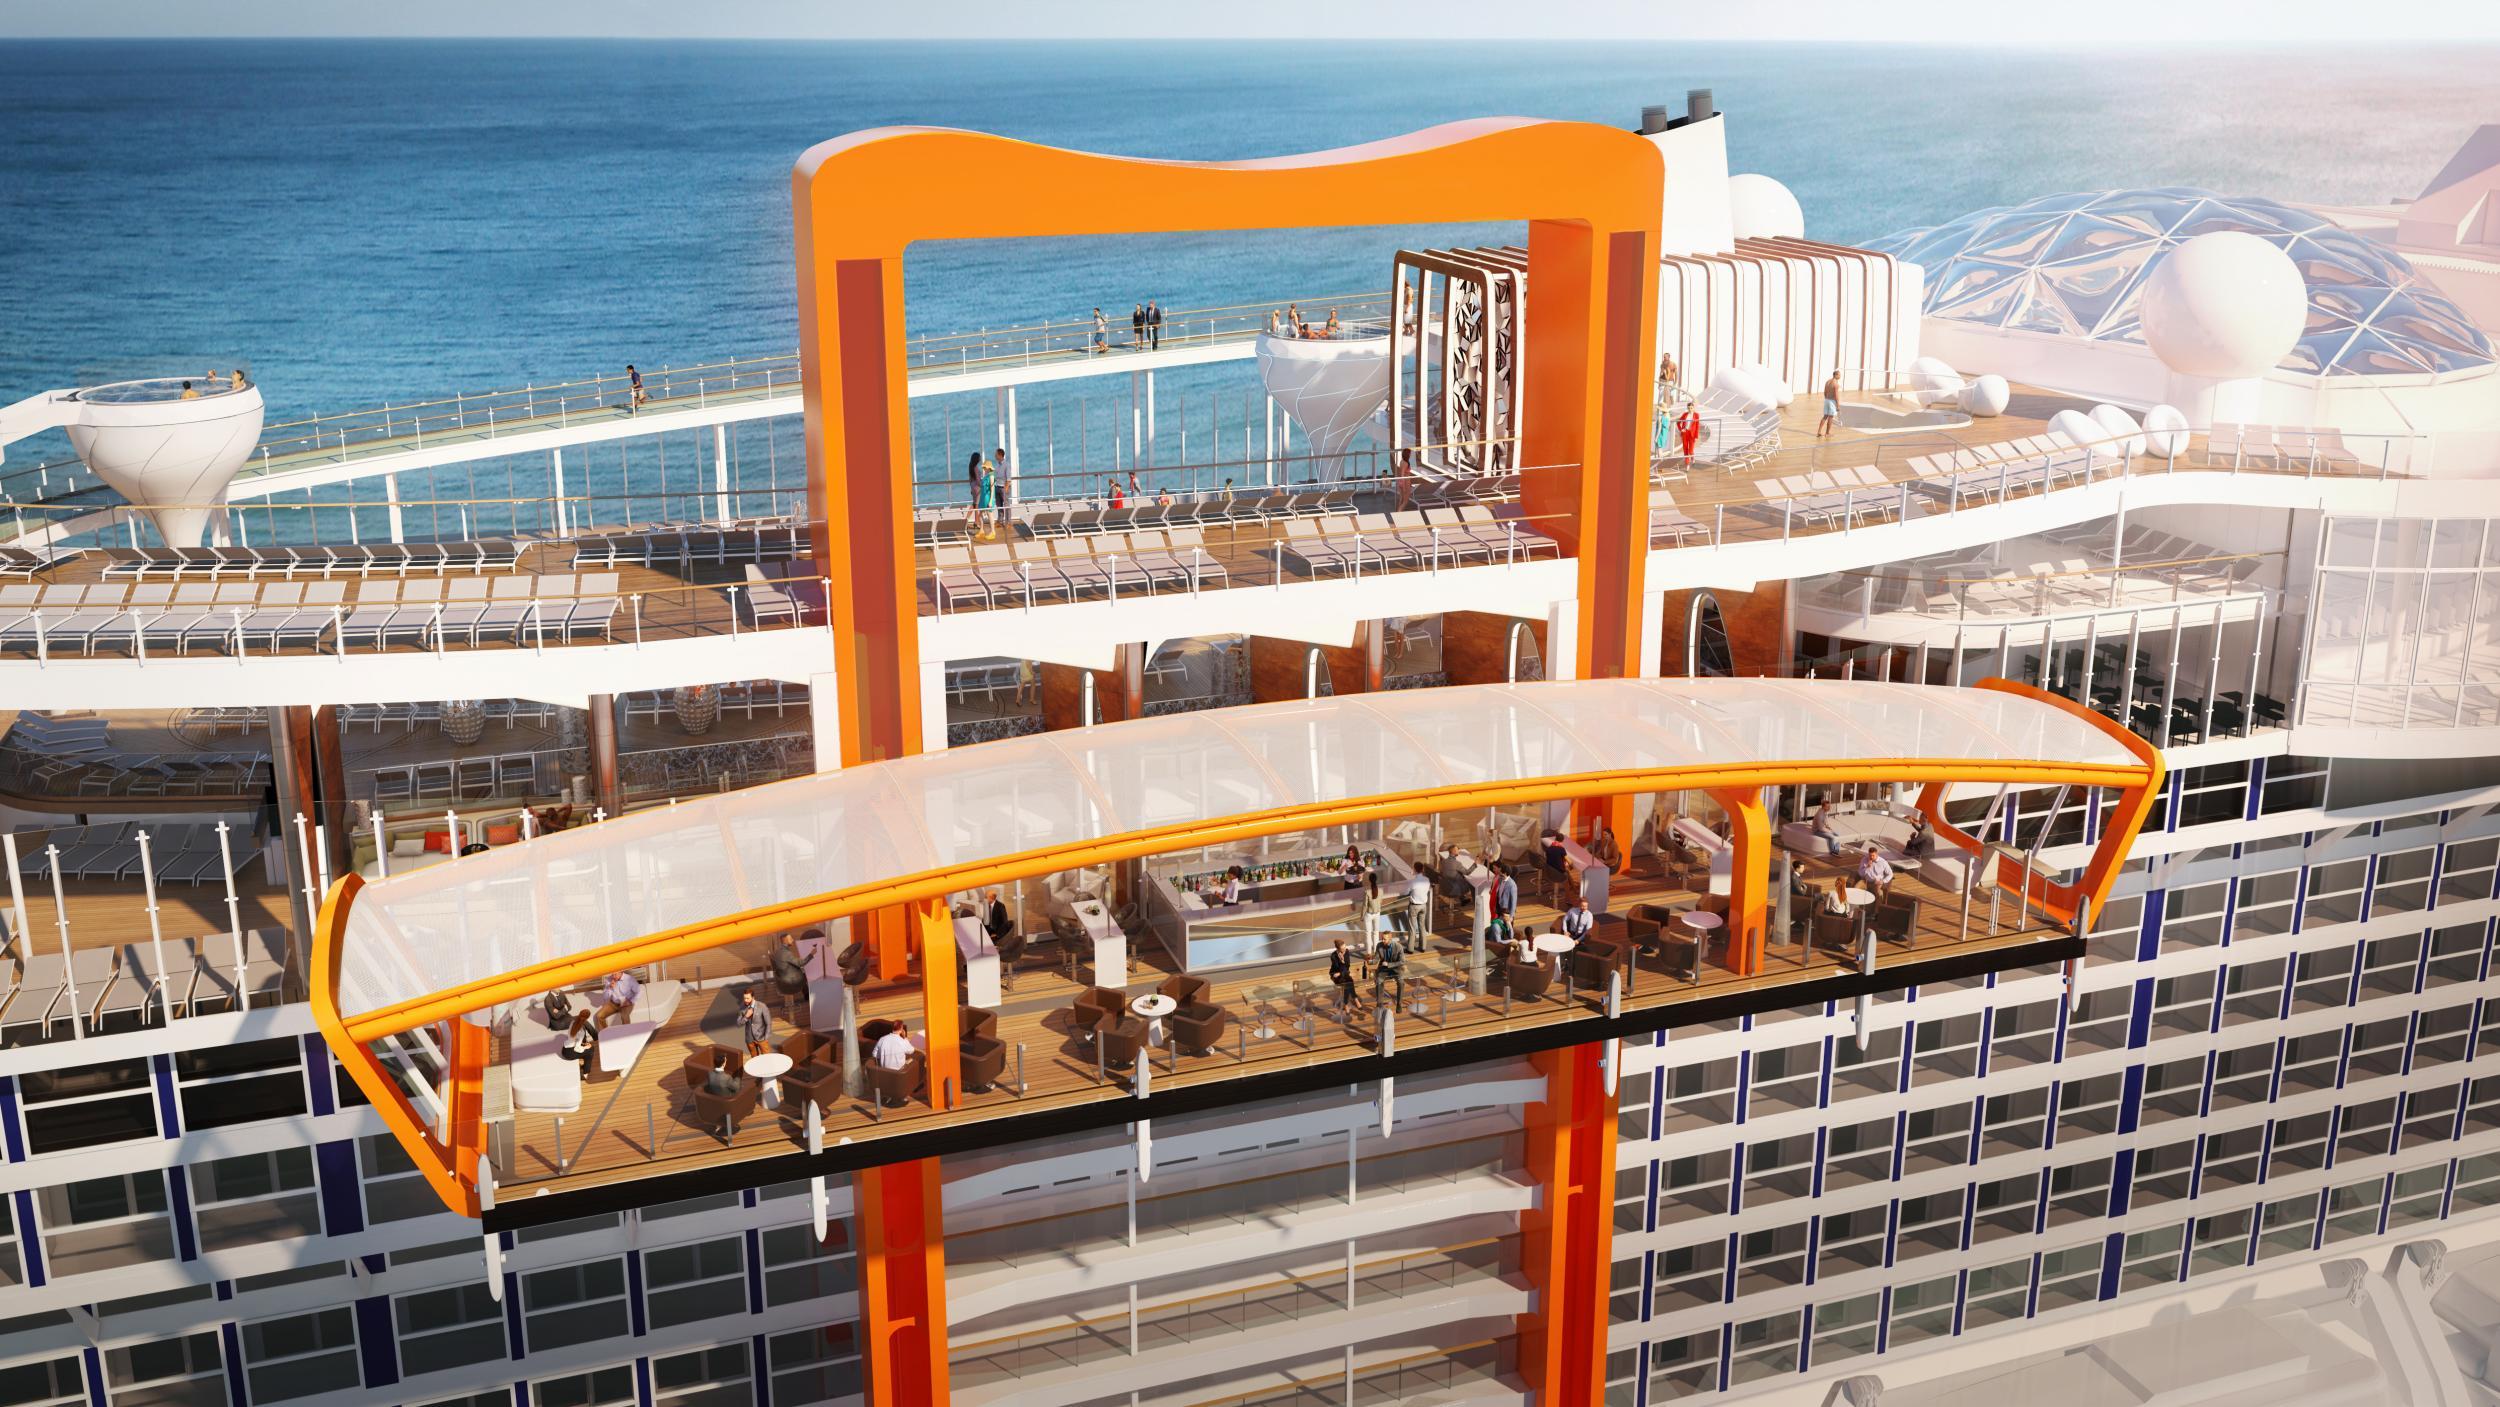 The Magic Carpet is a floating platform that will hang off the side of a new cruise ship